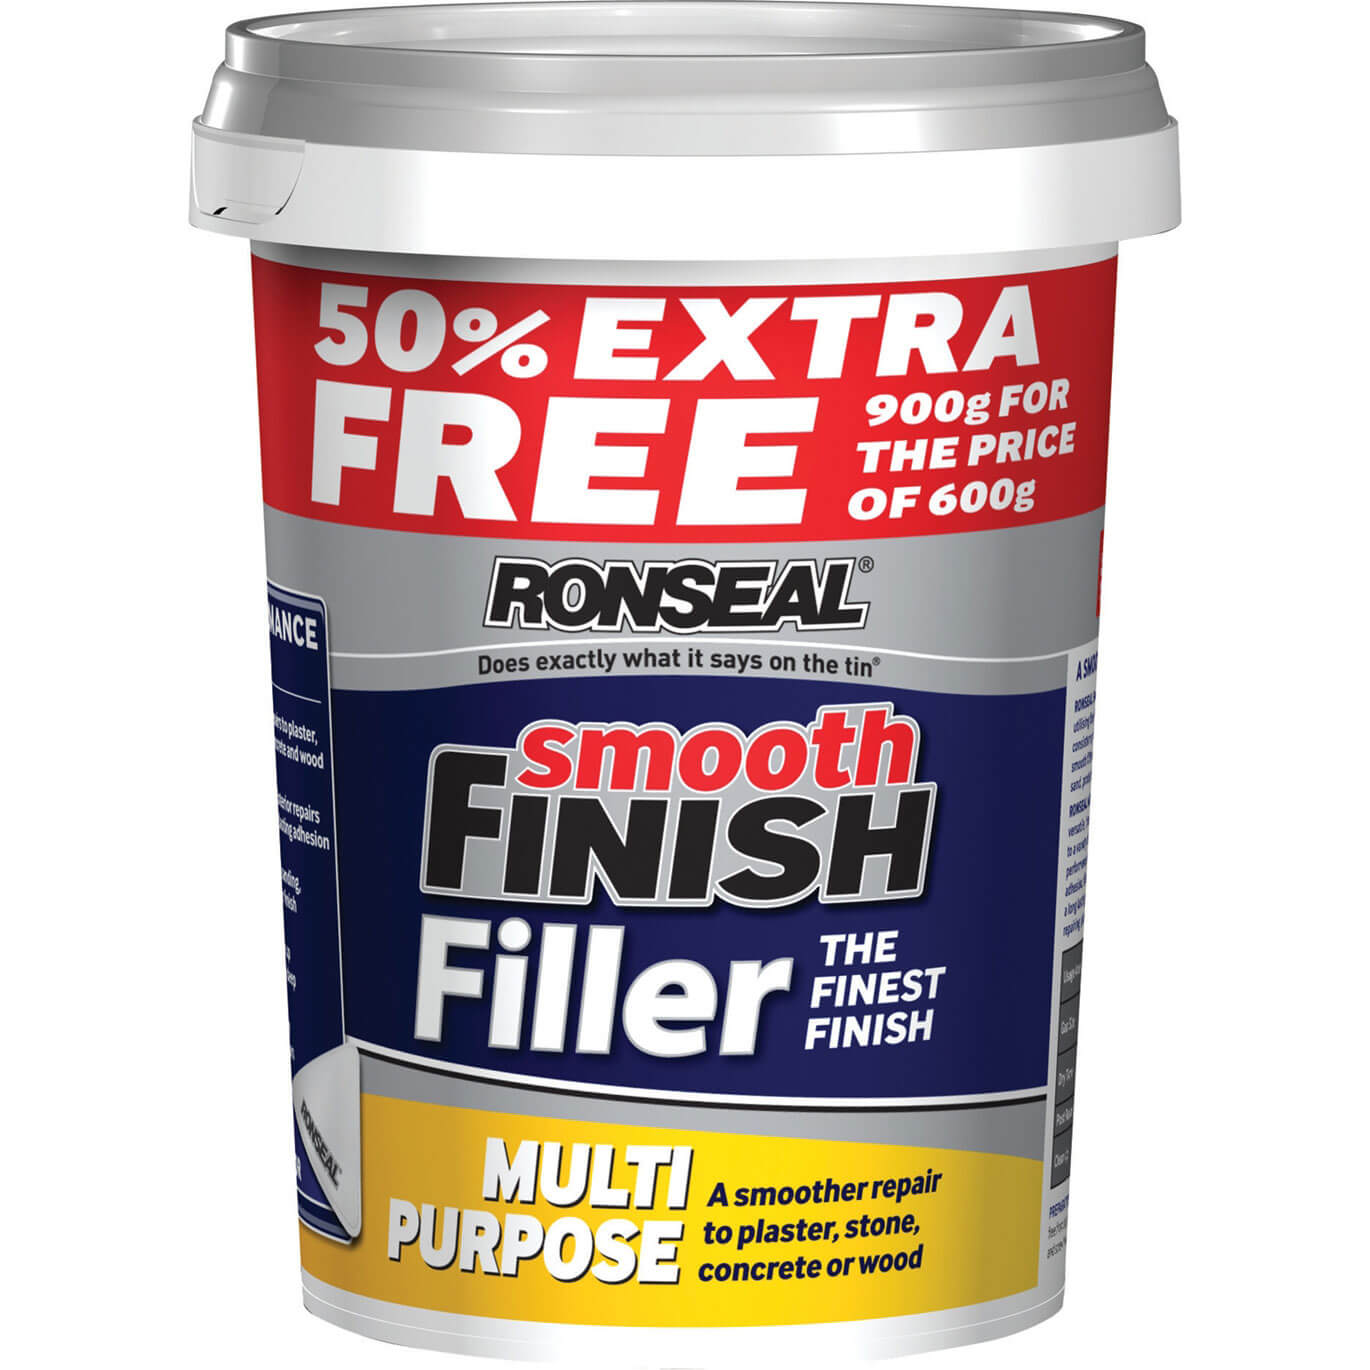 Image of Ronseal Smooth Finish Multi Purpose Interior Wall Ready Mix Filler 900g